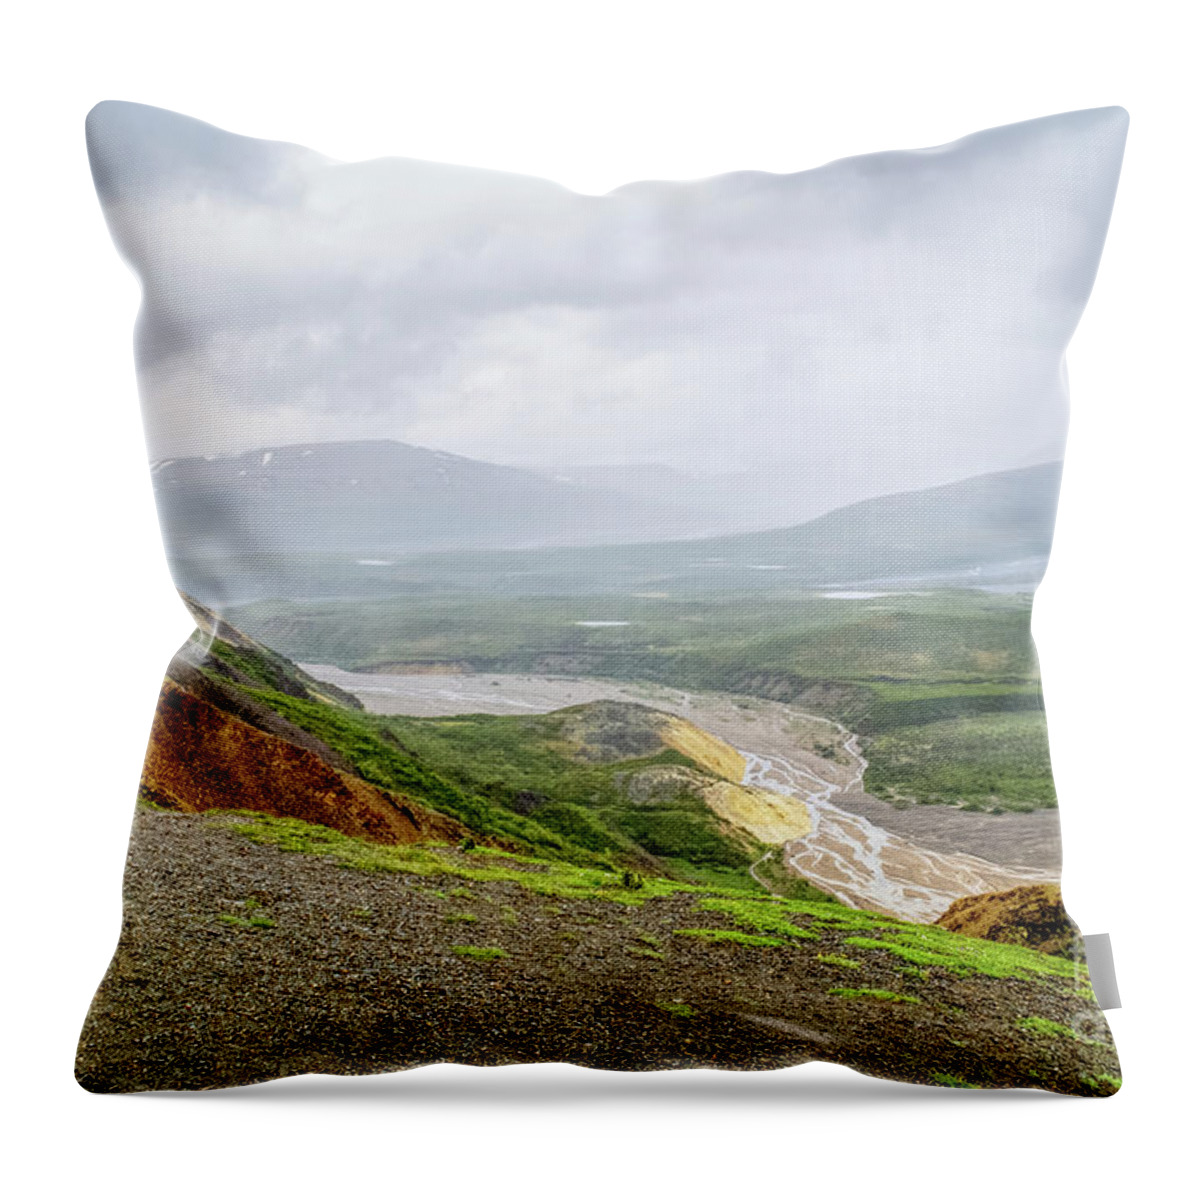 Alaska Throw Pillow featuring the photograph Denali Foggy Valley View by Jennifer White